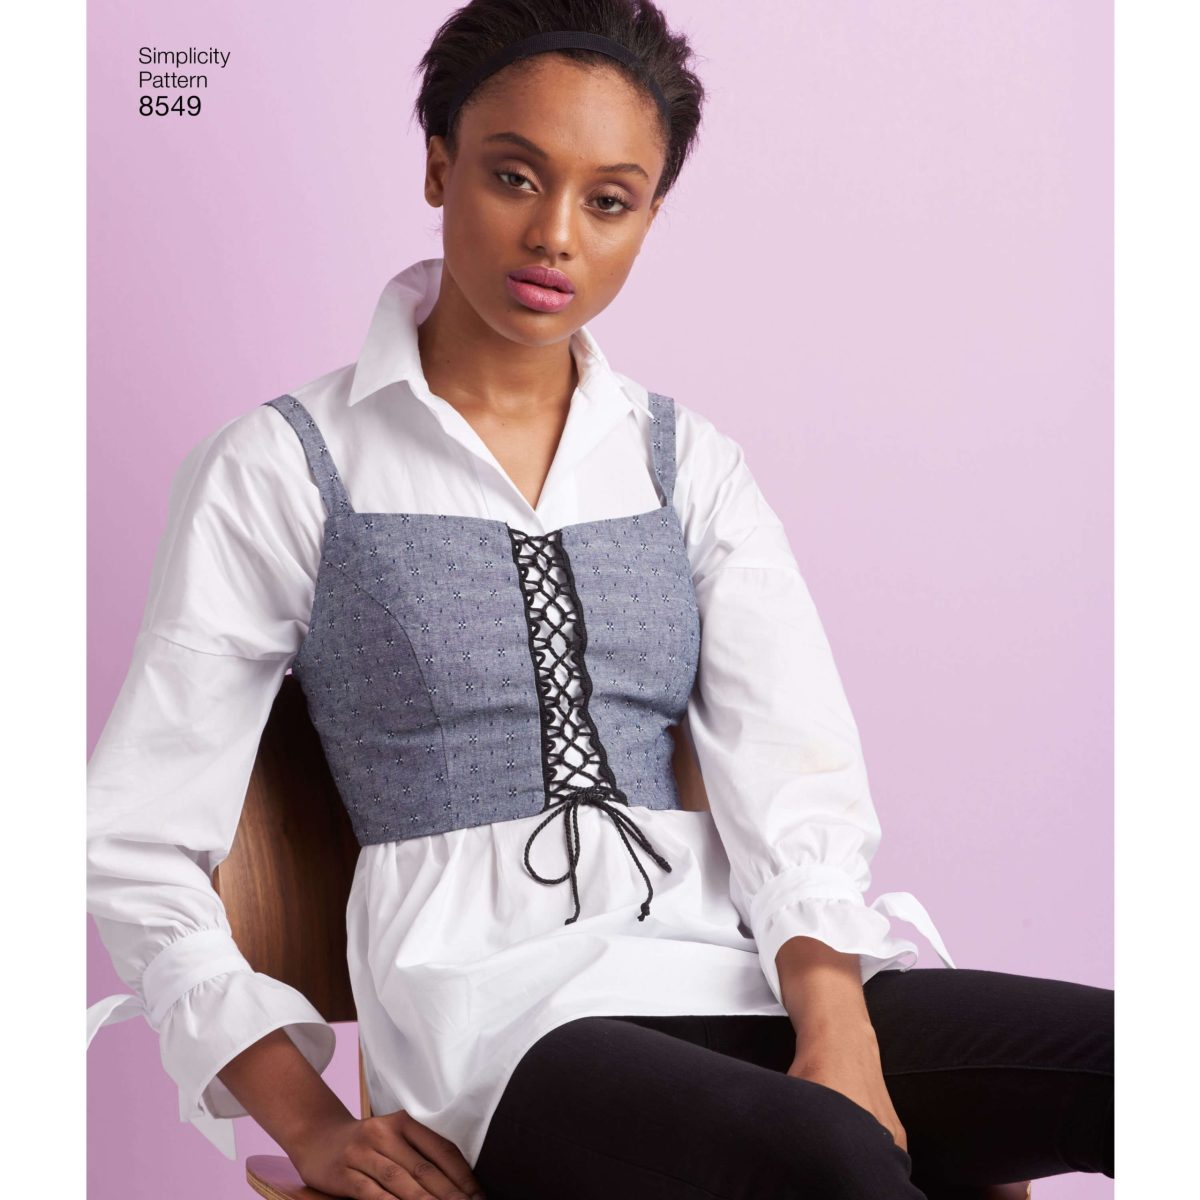 Simplicity Pattern 8549 Misses' Bra Tops - Sewdirect